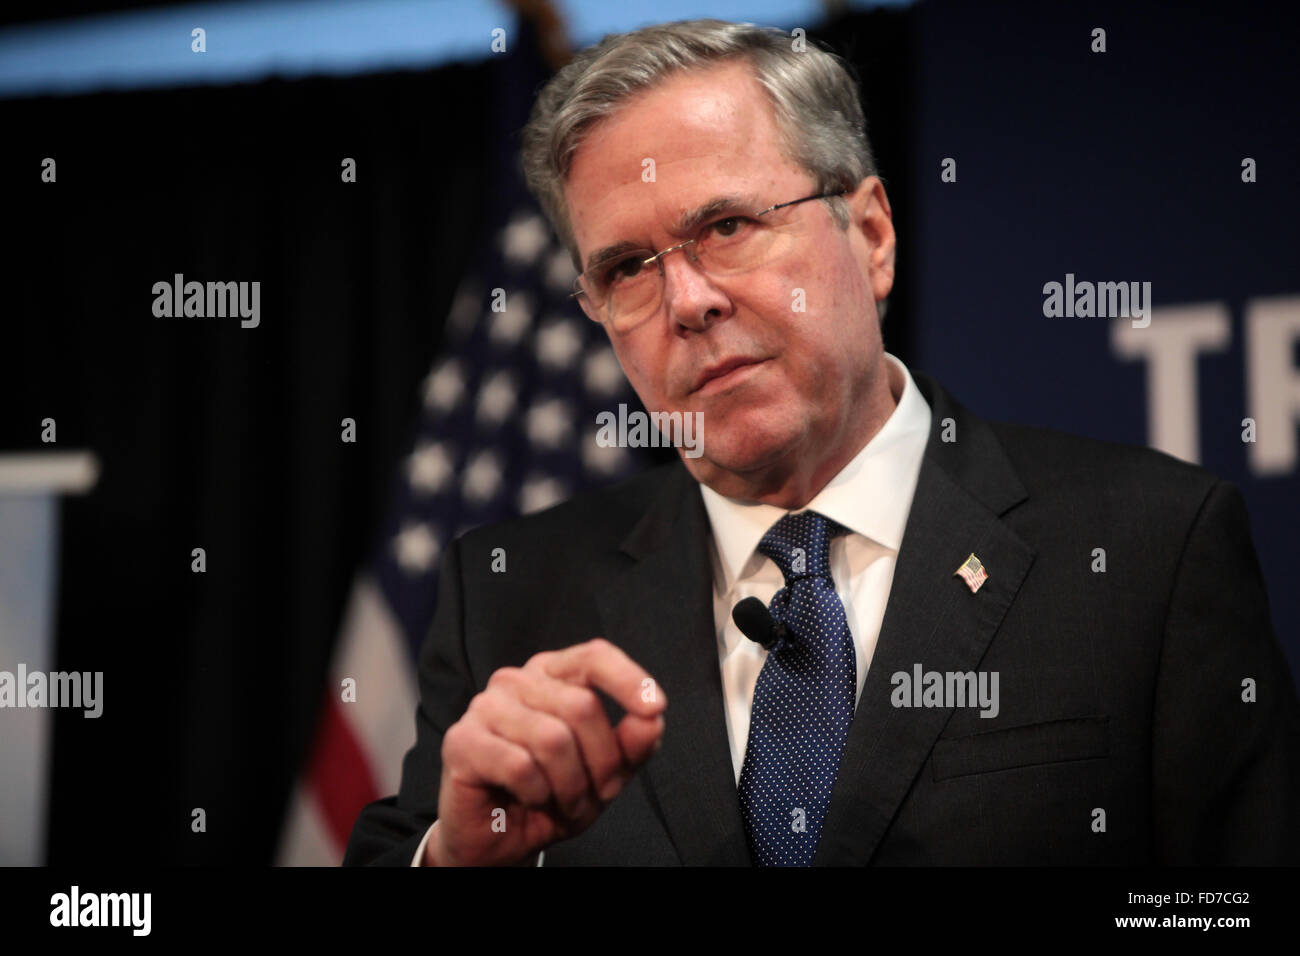 Former Gov. and GOP presidential candidate Jeb Bush speaks with supporters and employees at a Nationwide Insurance town hall meeting January 27, 2016 in Des Moines, Iowa. Stock Photo